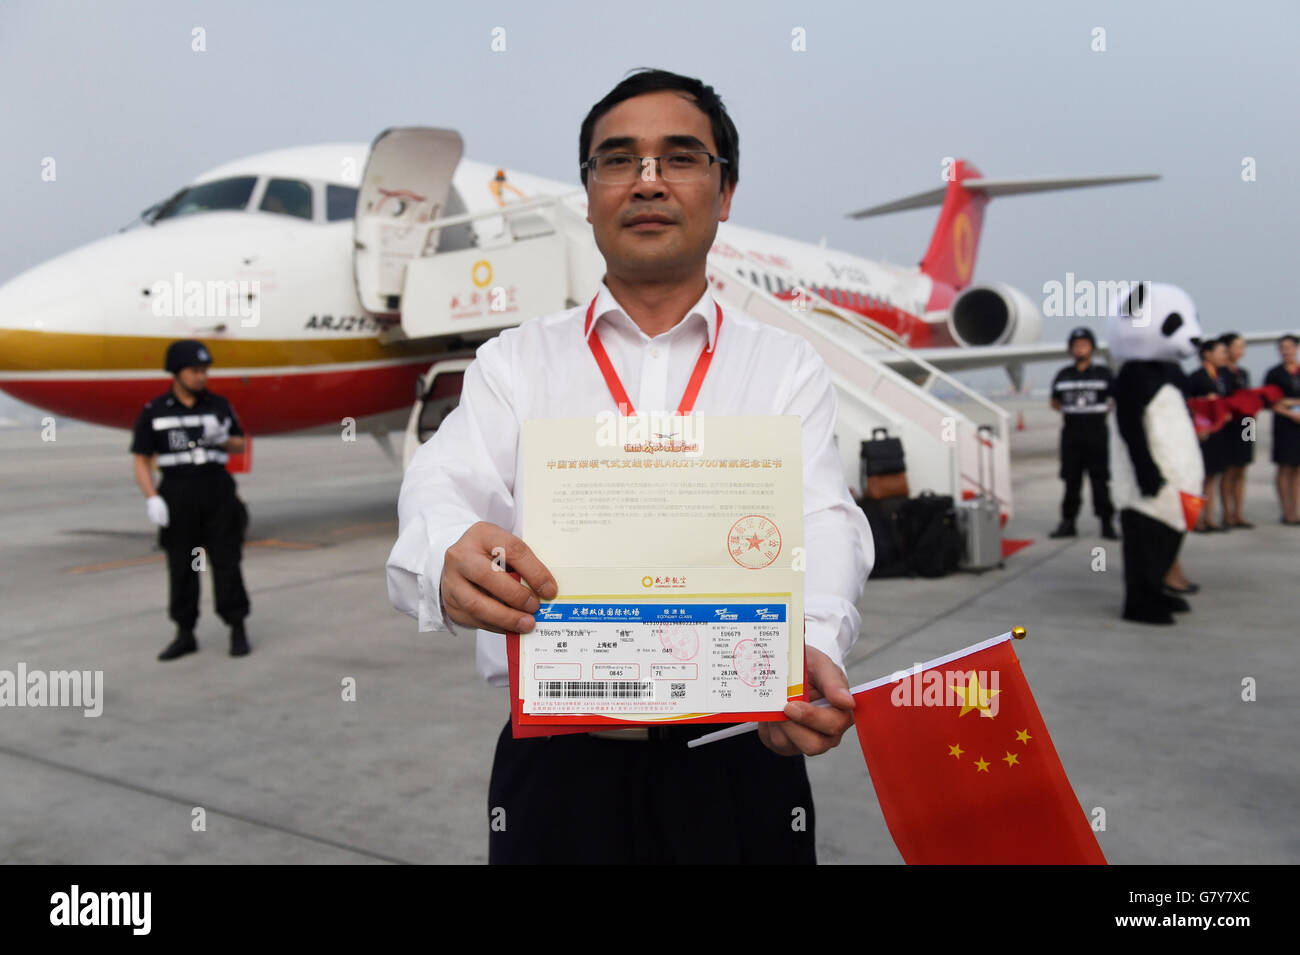 Chengdu, China's Sichuan Province. 28th June, 2016. A passenger shows his boarding pass in front of Chengdu Airlines ARJ21-700 at Shuangliu International Airport in Chengdu, capital of southwest China's Sichuan Province, June 28, 2016. ARJ21, manufactured by the Commercial Aircraft Corp. of China (COMAC), made its maiden commercial flight from Chengdu to Shanghai Tuesday. The domestically-designed airliner is China's first regional jet manufactured according to international standards. © Liu Kun/Xinhua/Alamy Live News Stock Photo